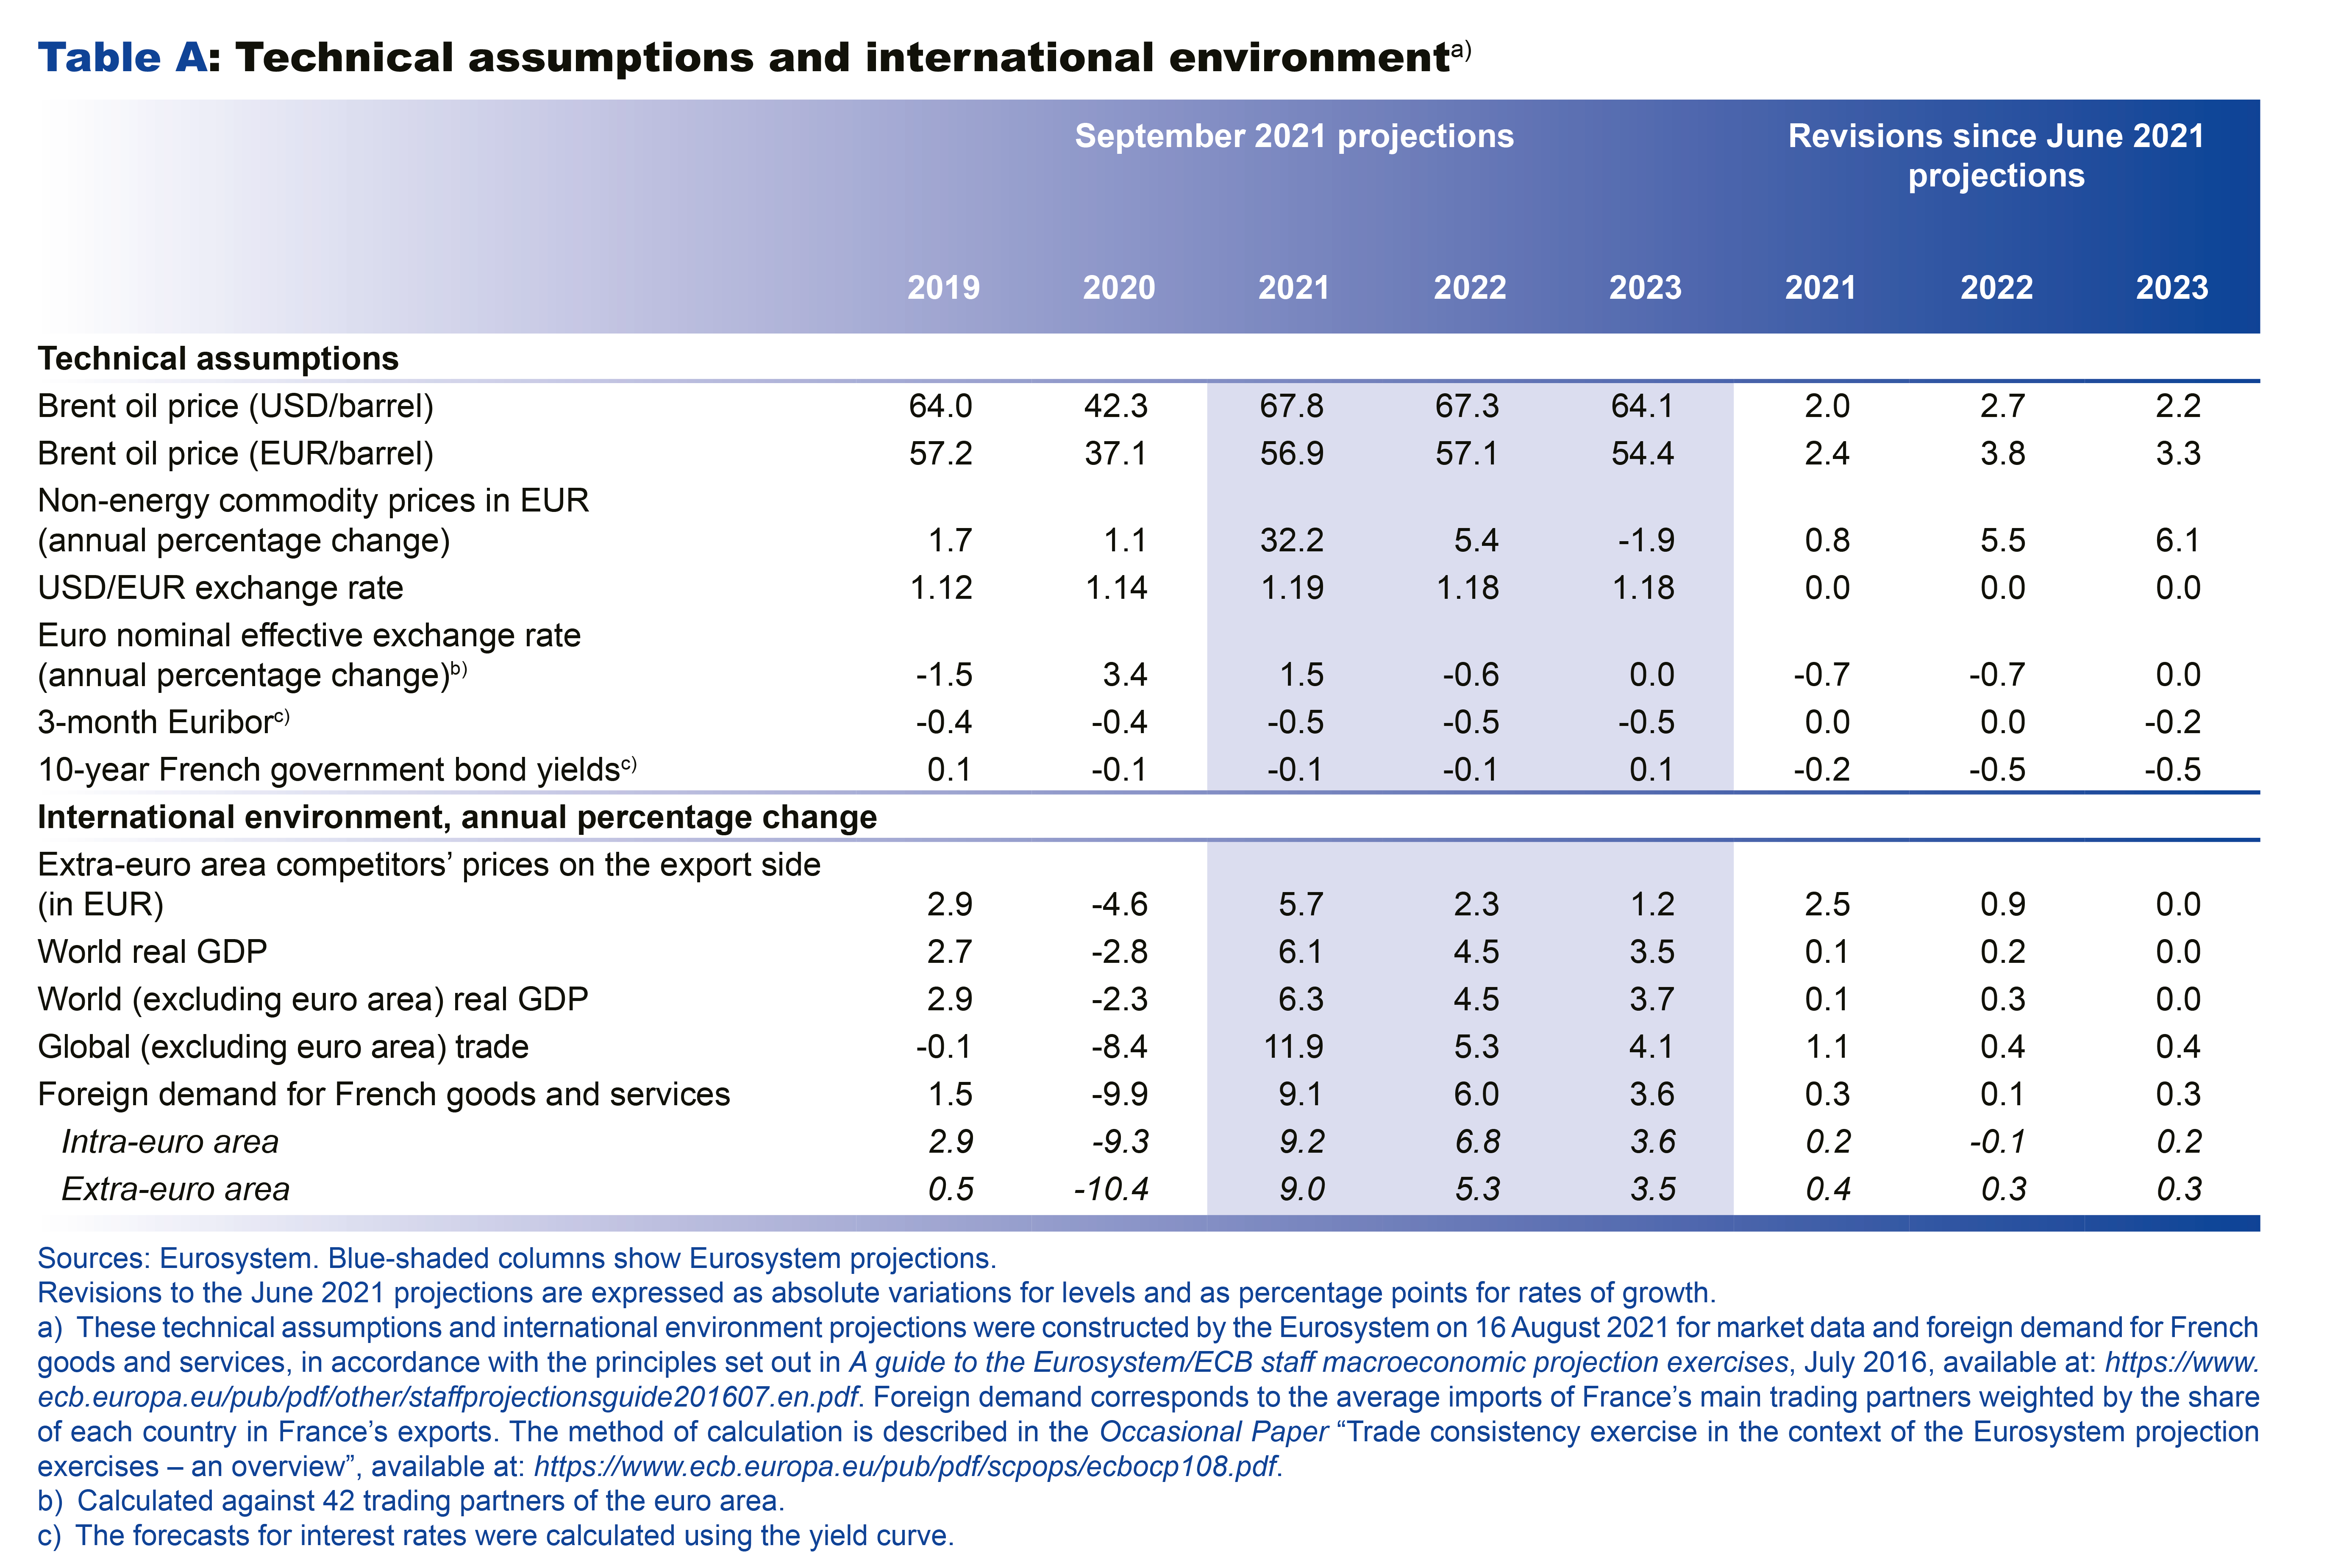 Macroeconomic projections – September 2021 - Technical assumptions and international environment